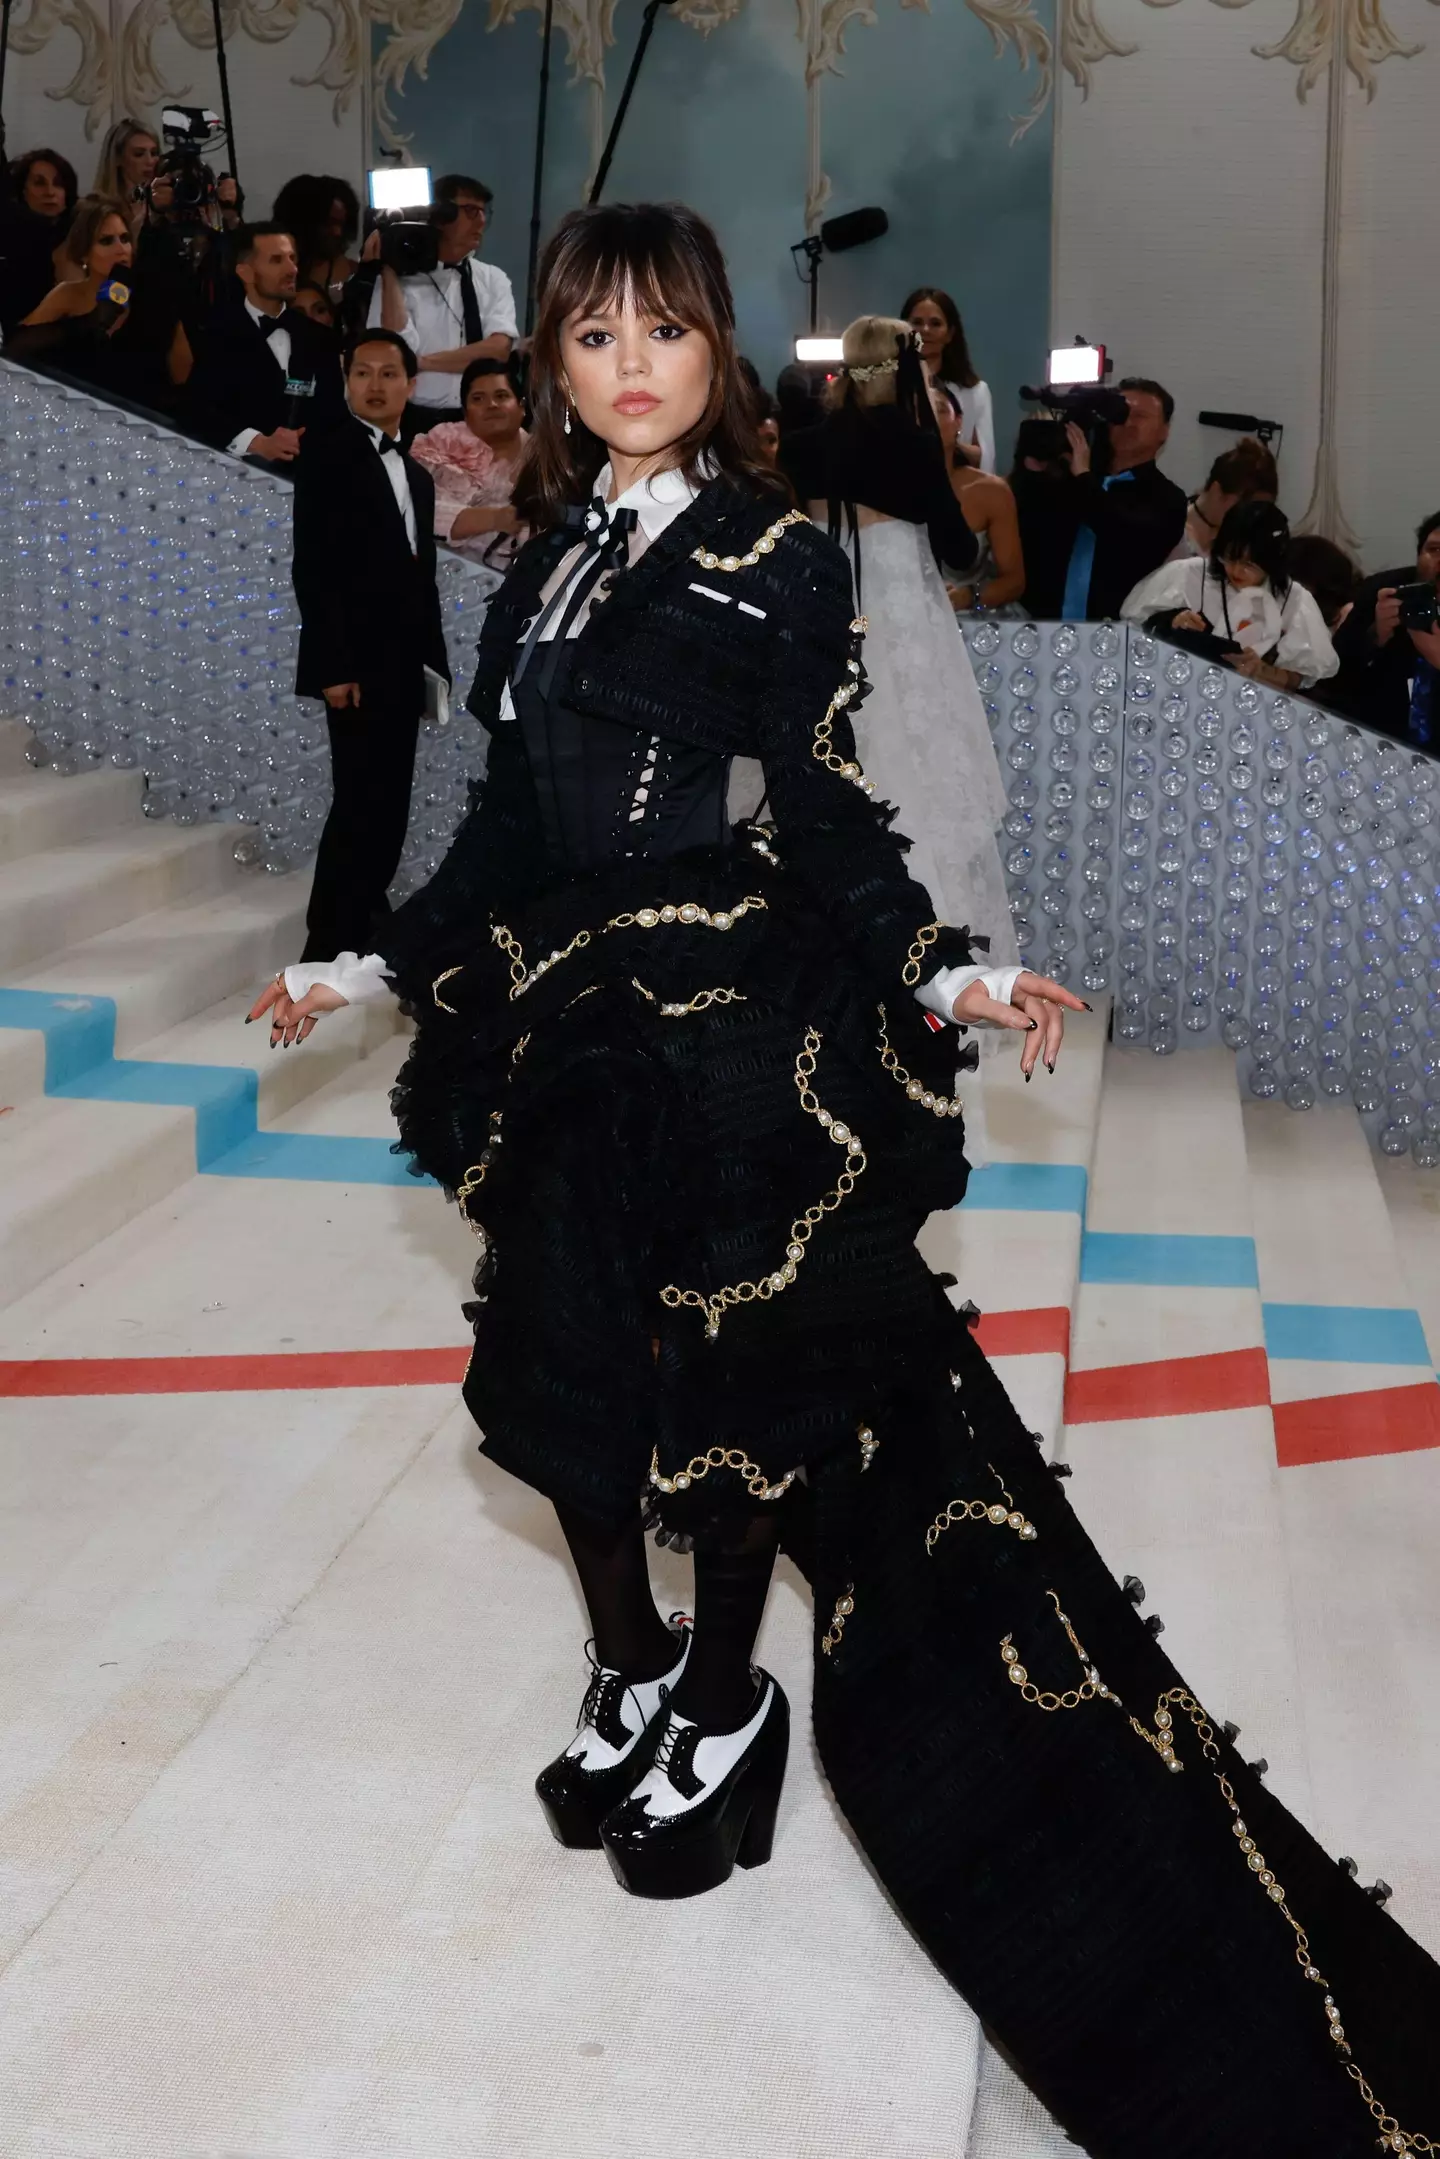 The actor took inspiration for her MET Gala look from her gothic character.